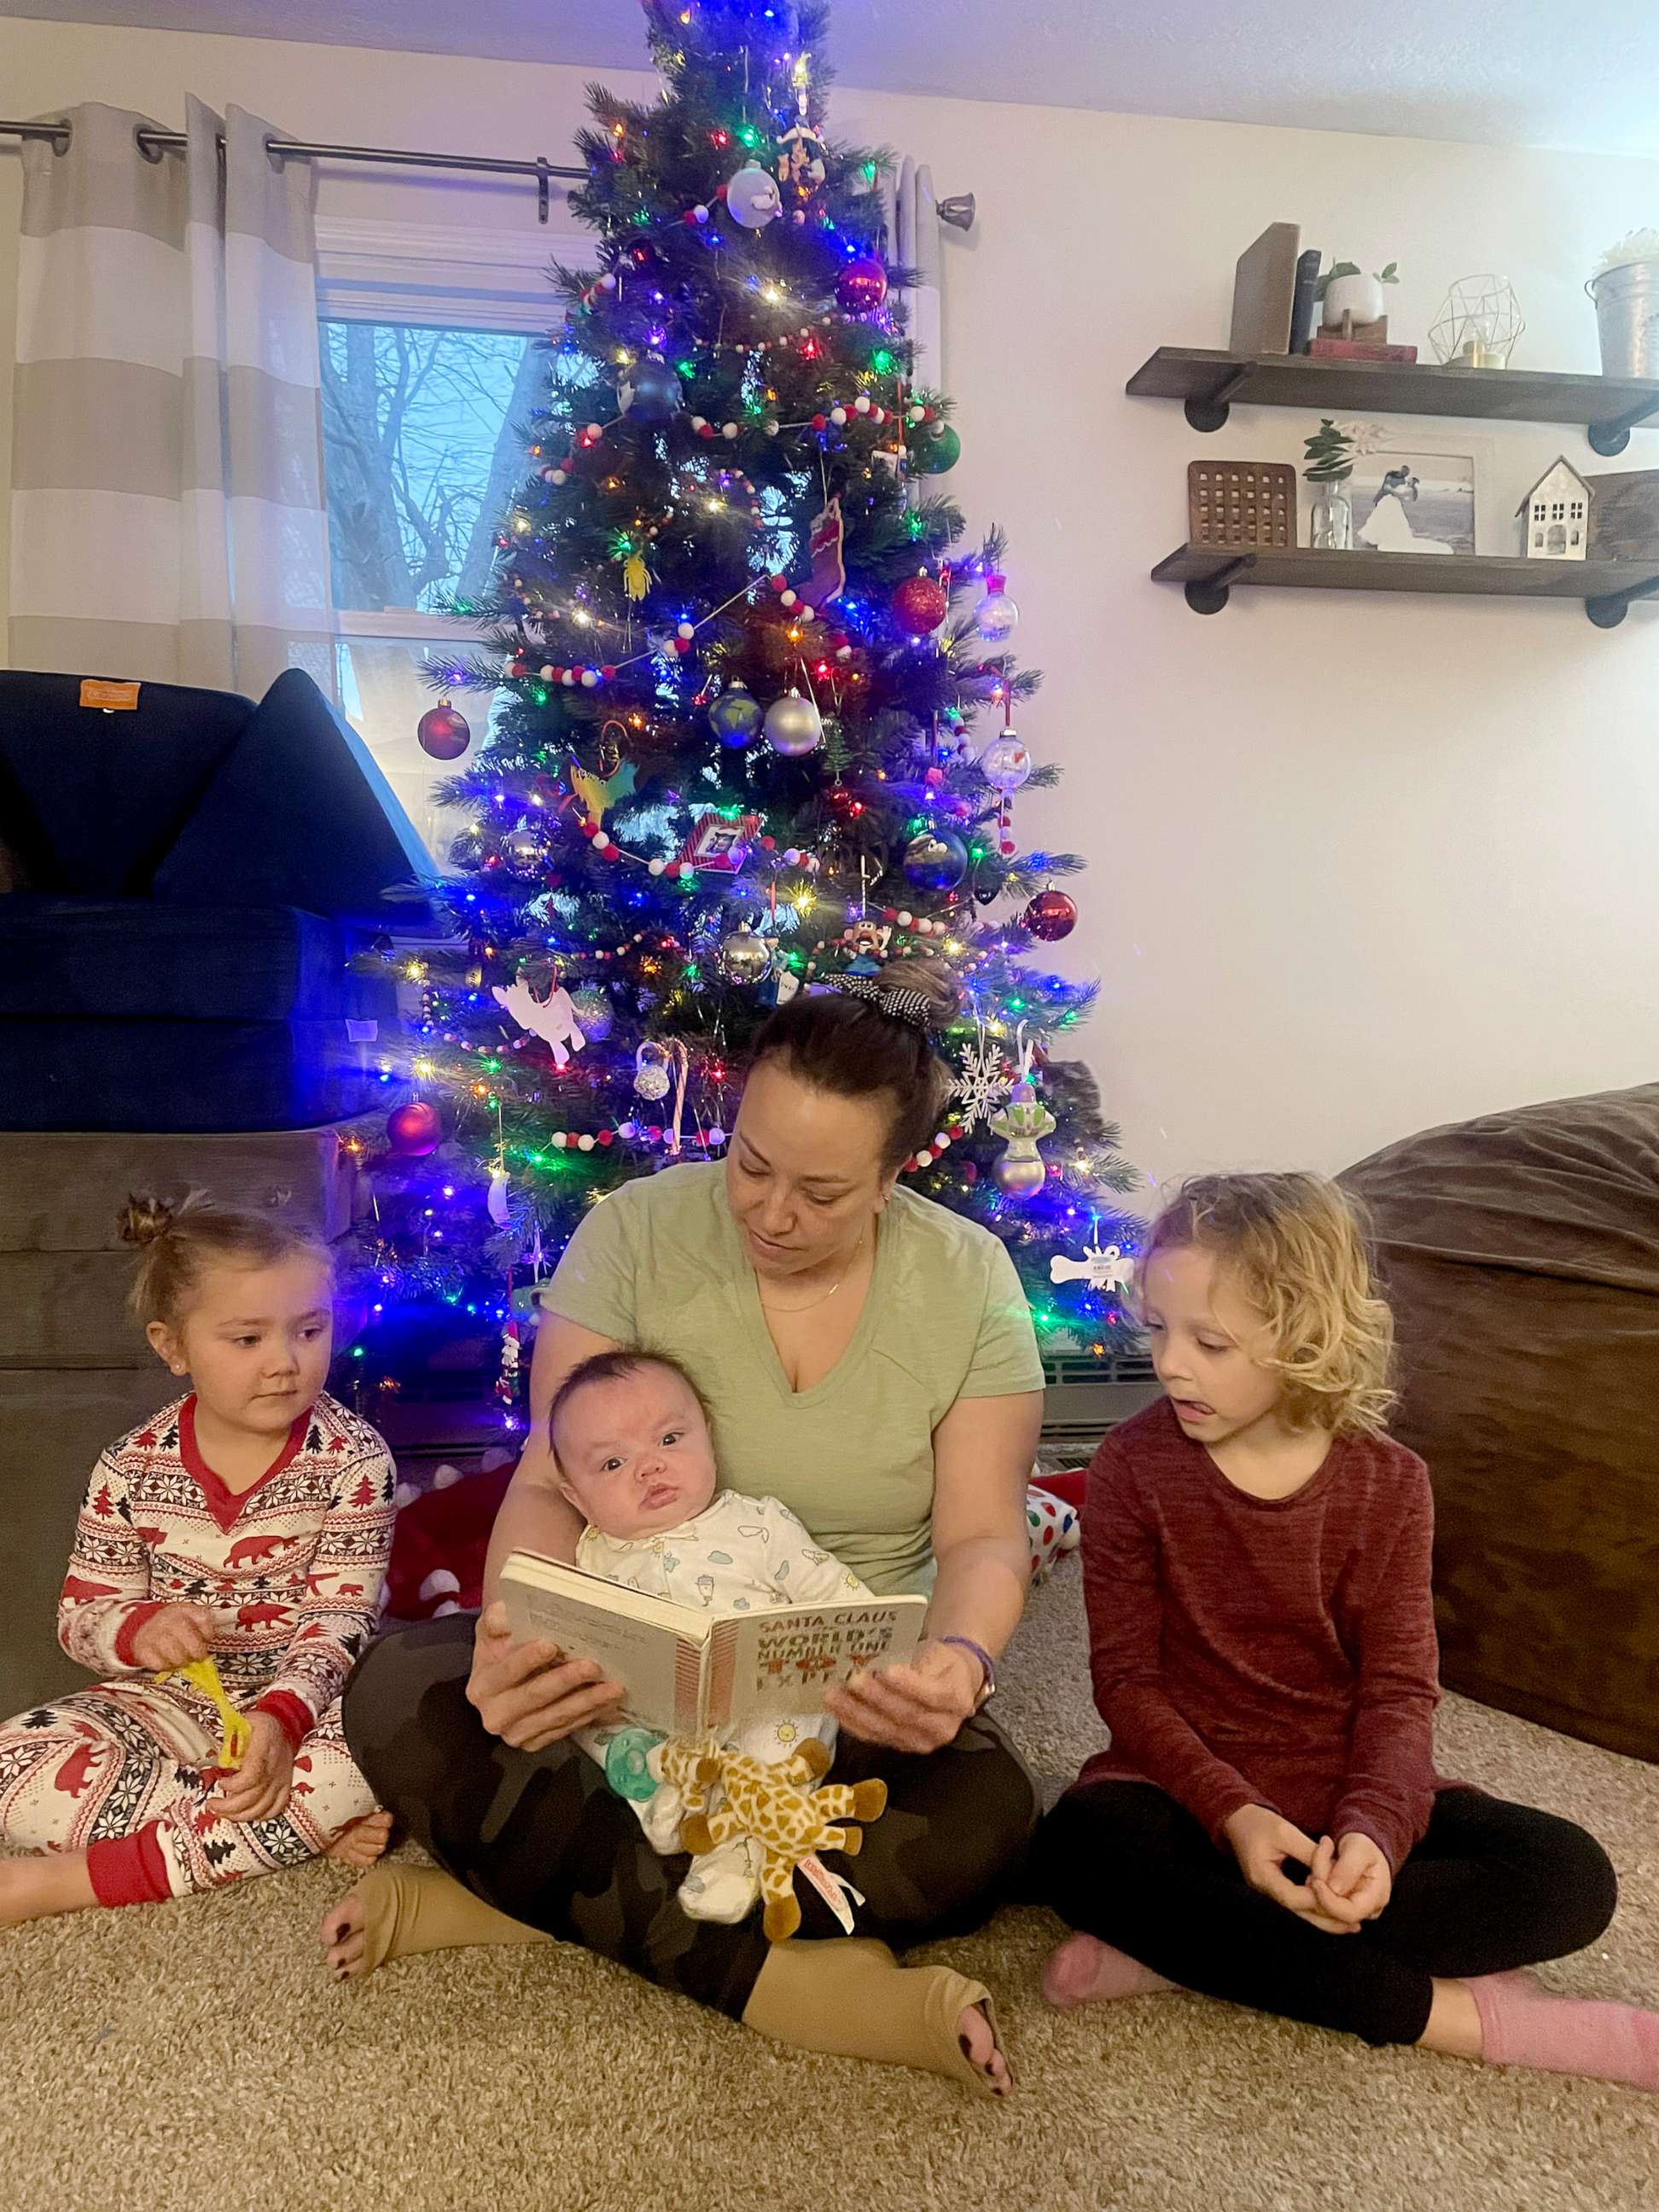 PHOTO: Autumn Carver is celebrating Christmas at home with her three children after a 100-day hospitalization due to COVID-19.